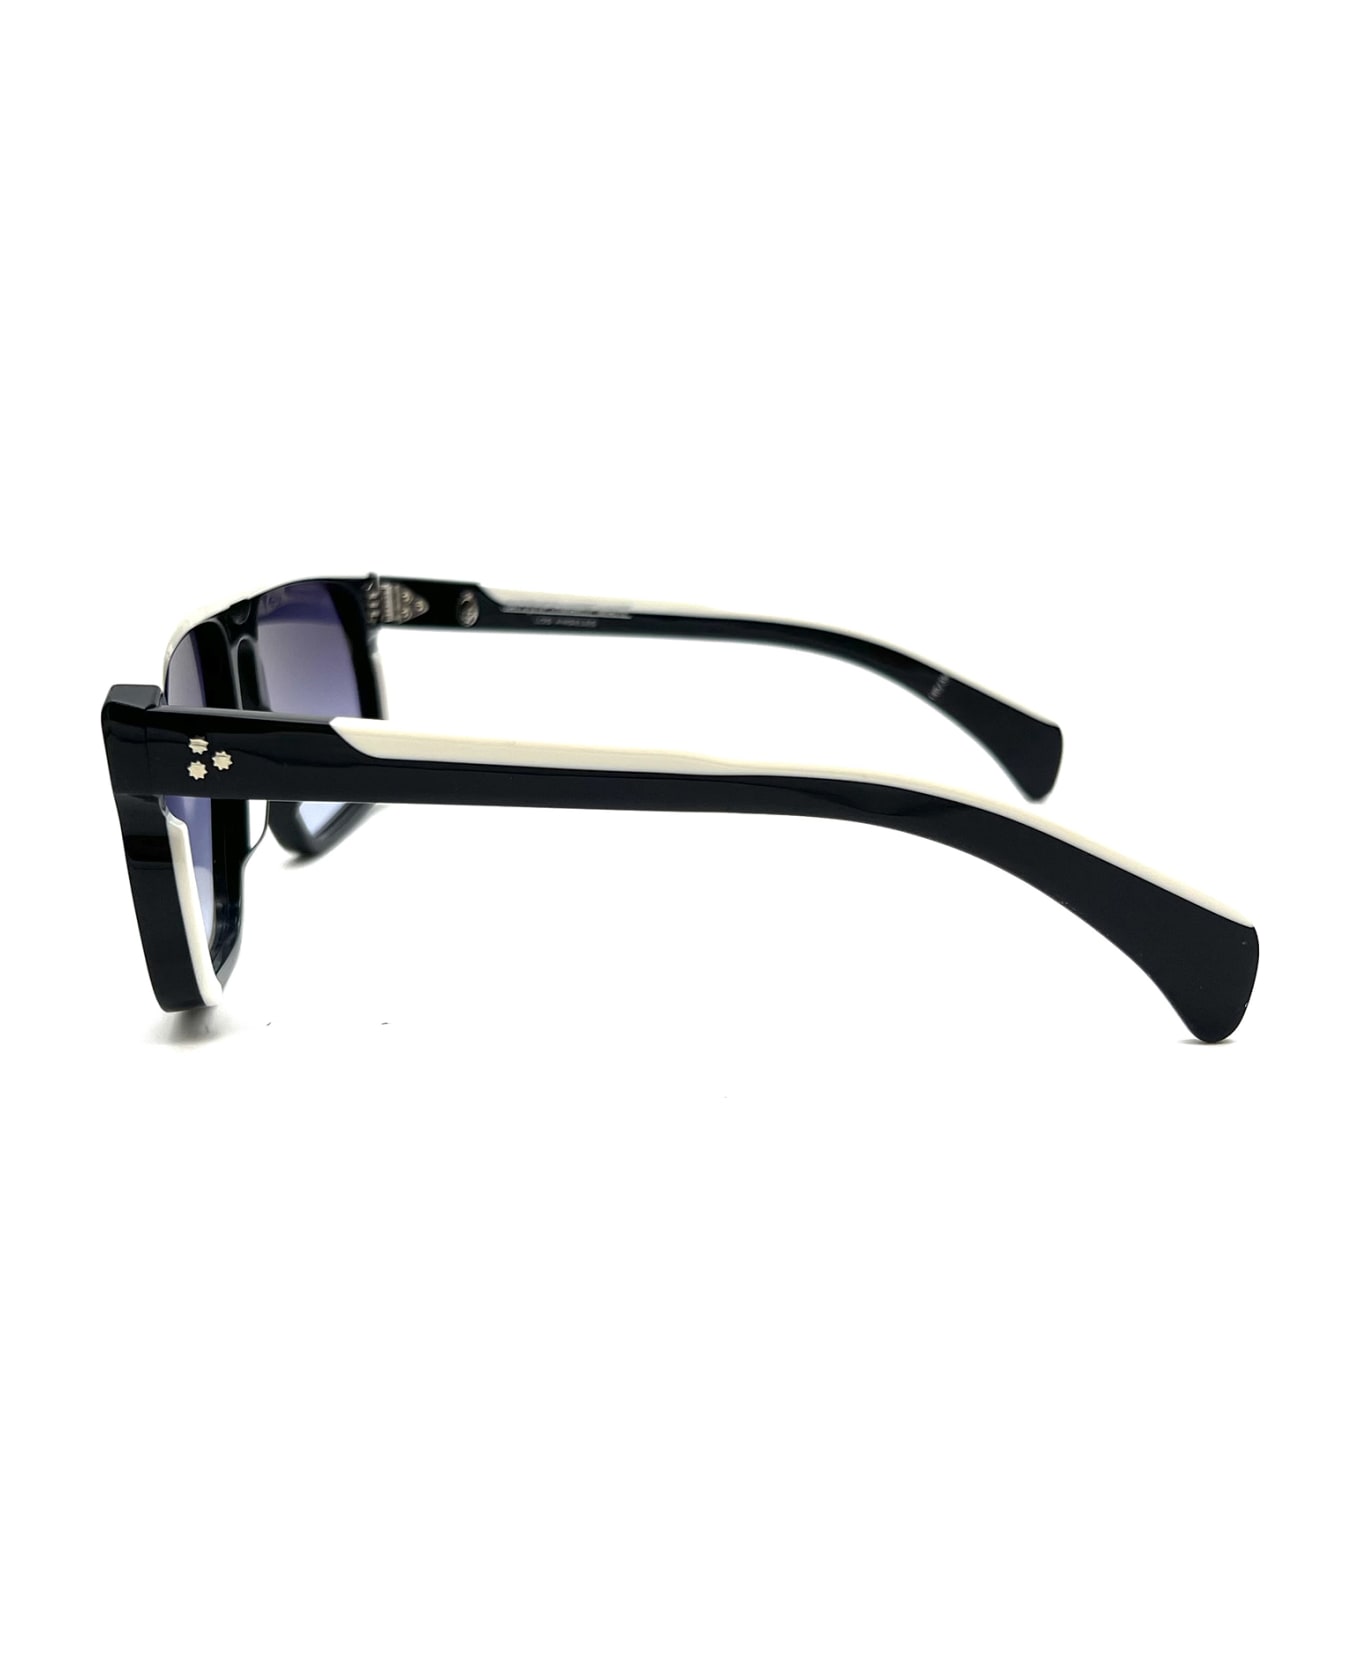 Jacques Marie Mage NEPTURE Sunglasses - O Navy,oxlord